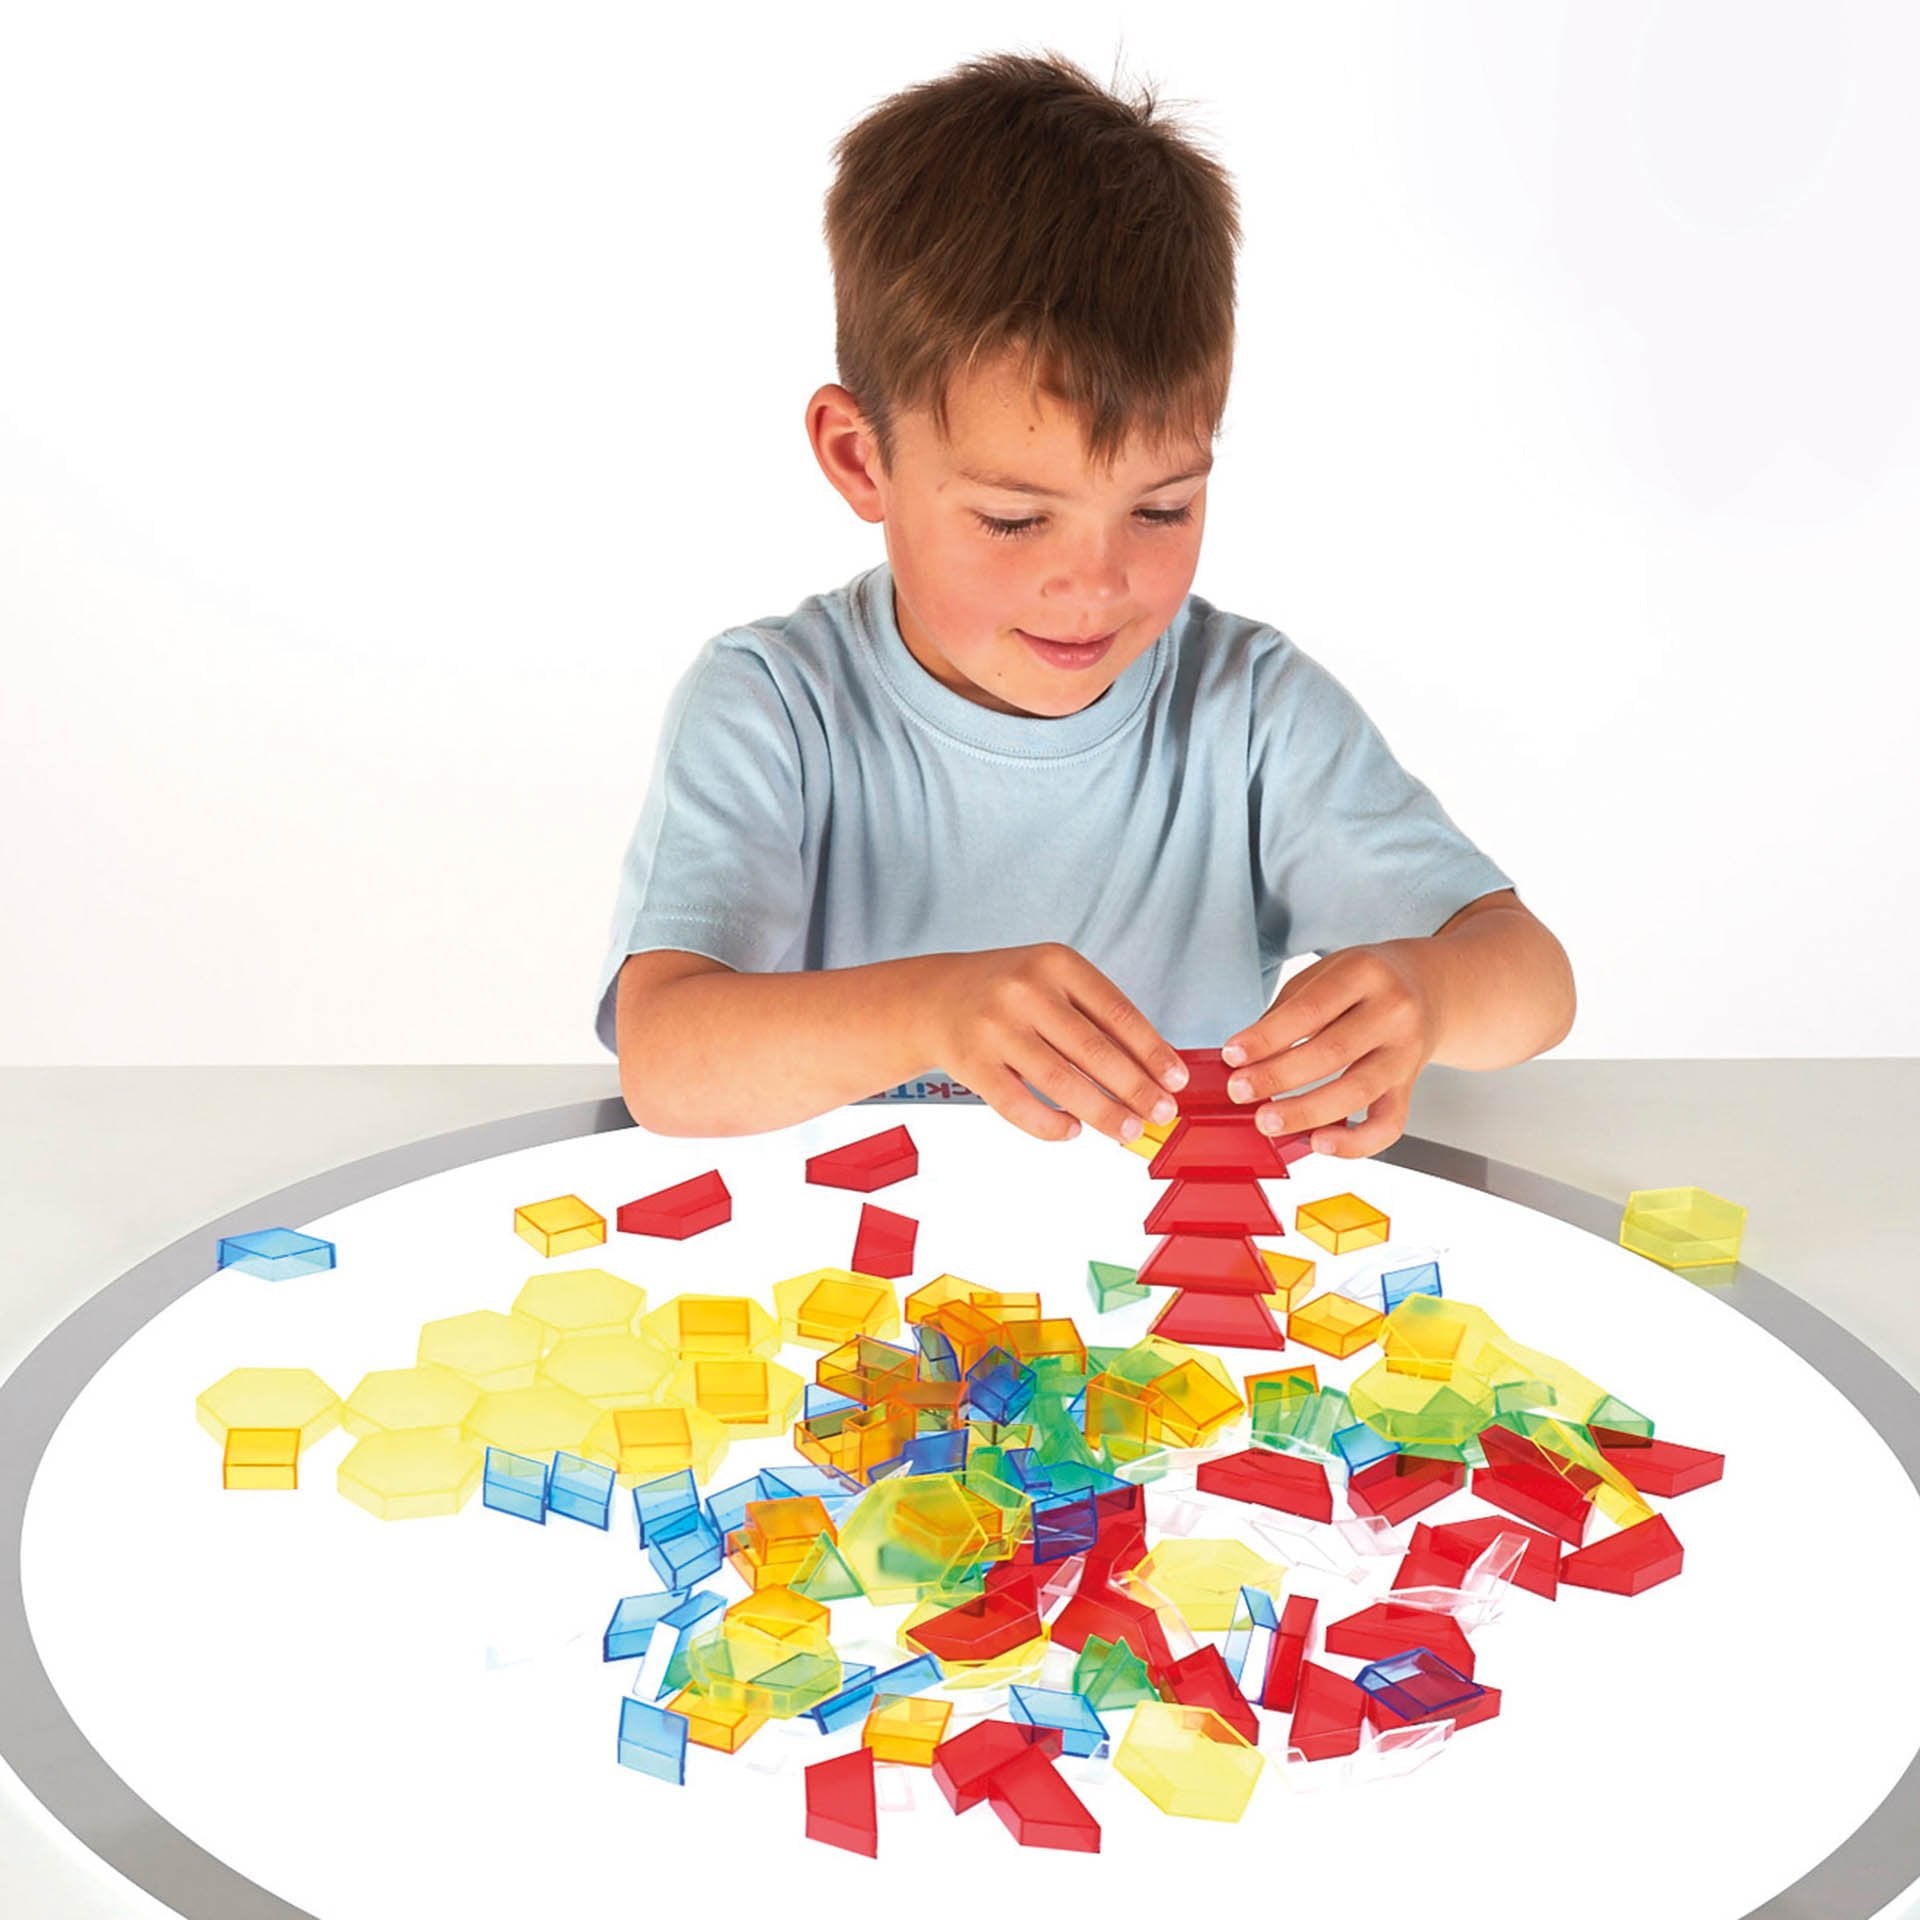 Translucent Hollow Pattern Blocks, TickiT® Translucent Hollow Pattern Blocks is a set of colour acrylic pattern blocks in six different shapes. Perfect for use on a light panel where shapes and patterns look even more impressive with the light shining through the colourful blocks! Ideal for developing fine motor skills through construction, pattern and sequencing activities, counting and sorting, learning about shapes and colour and colour mixing. Set includes: 180 blocks in 6 colours and 6 shapes (yellow h